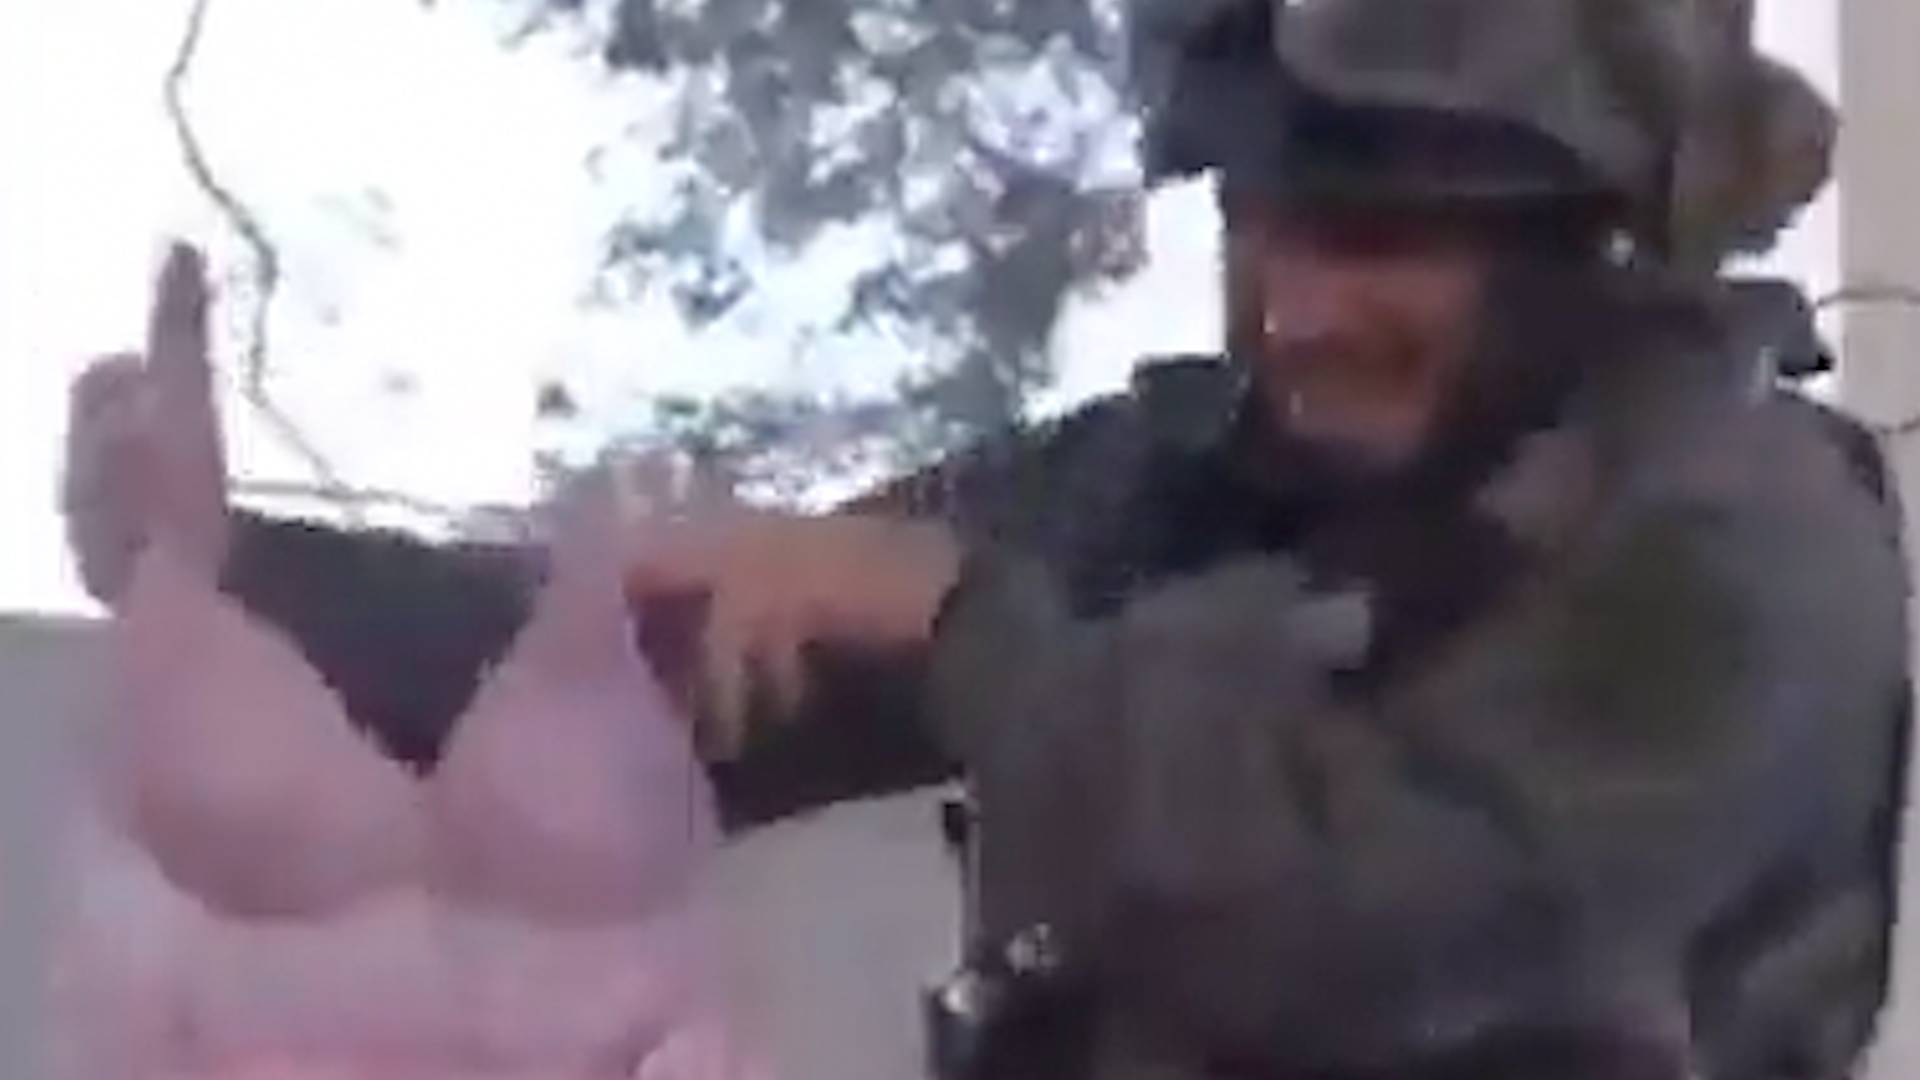 Israeli soldiers film themselves with Palestinian’s private belongings